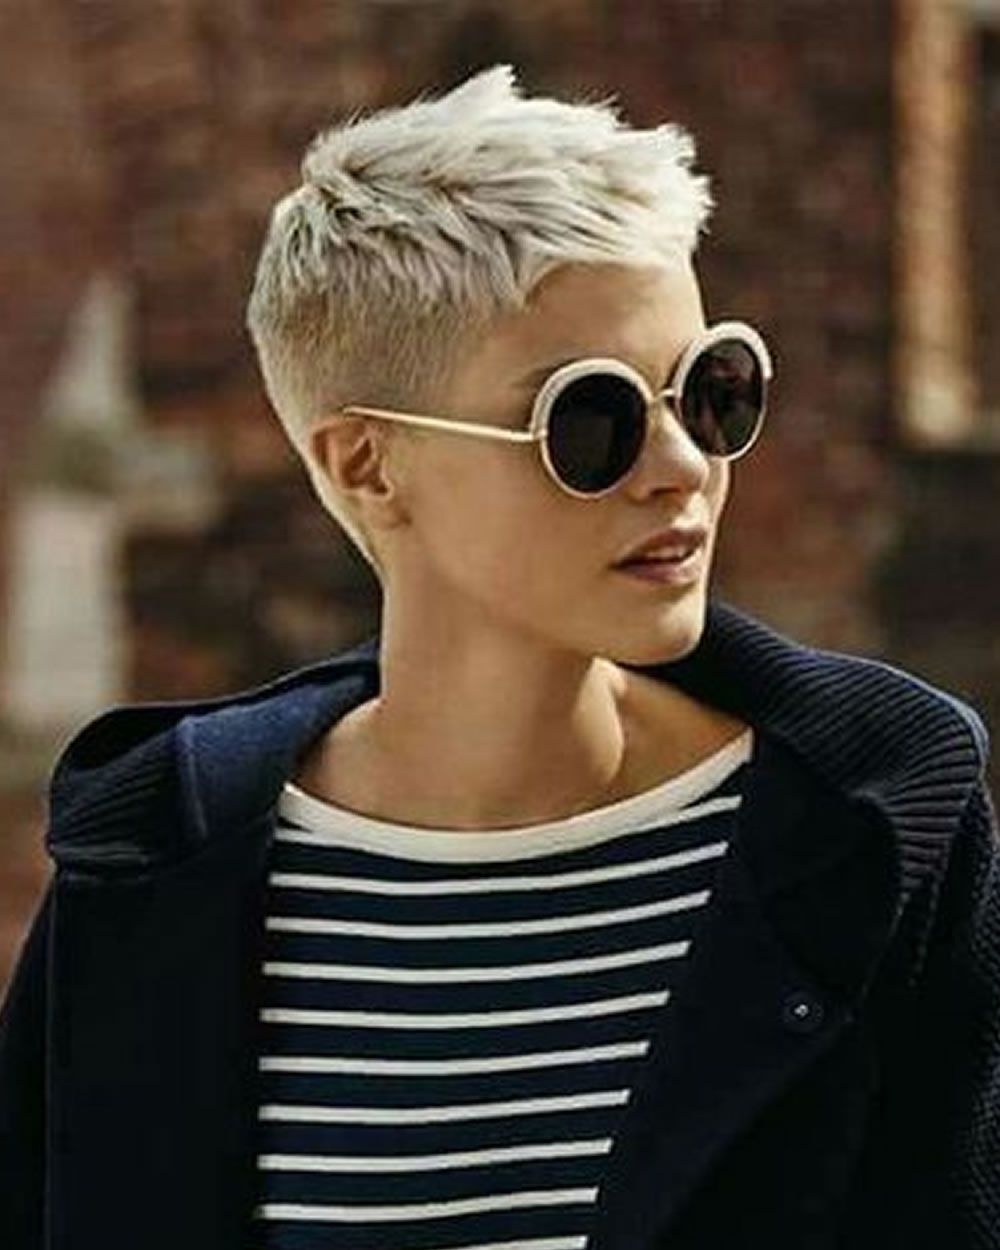 Super Very Short Pixie Haircuts & Hair Colors For 2018 2019 Regarding Most Current Short Pixie Hairstyles (View 7 of 15)